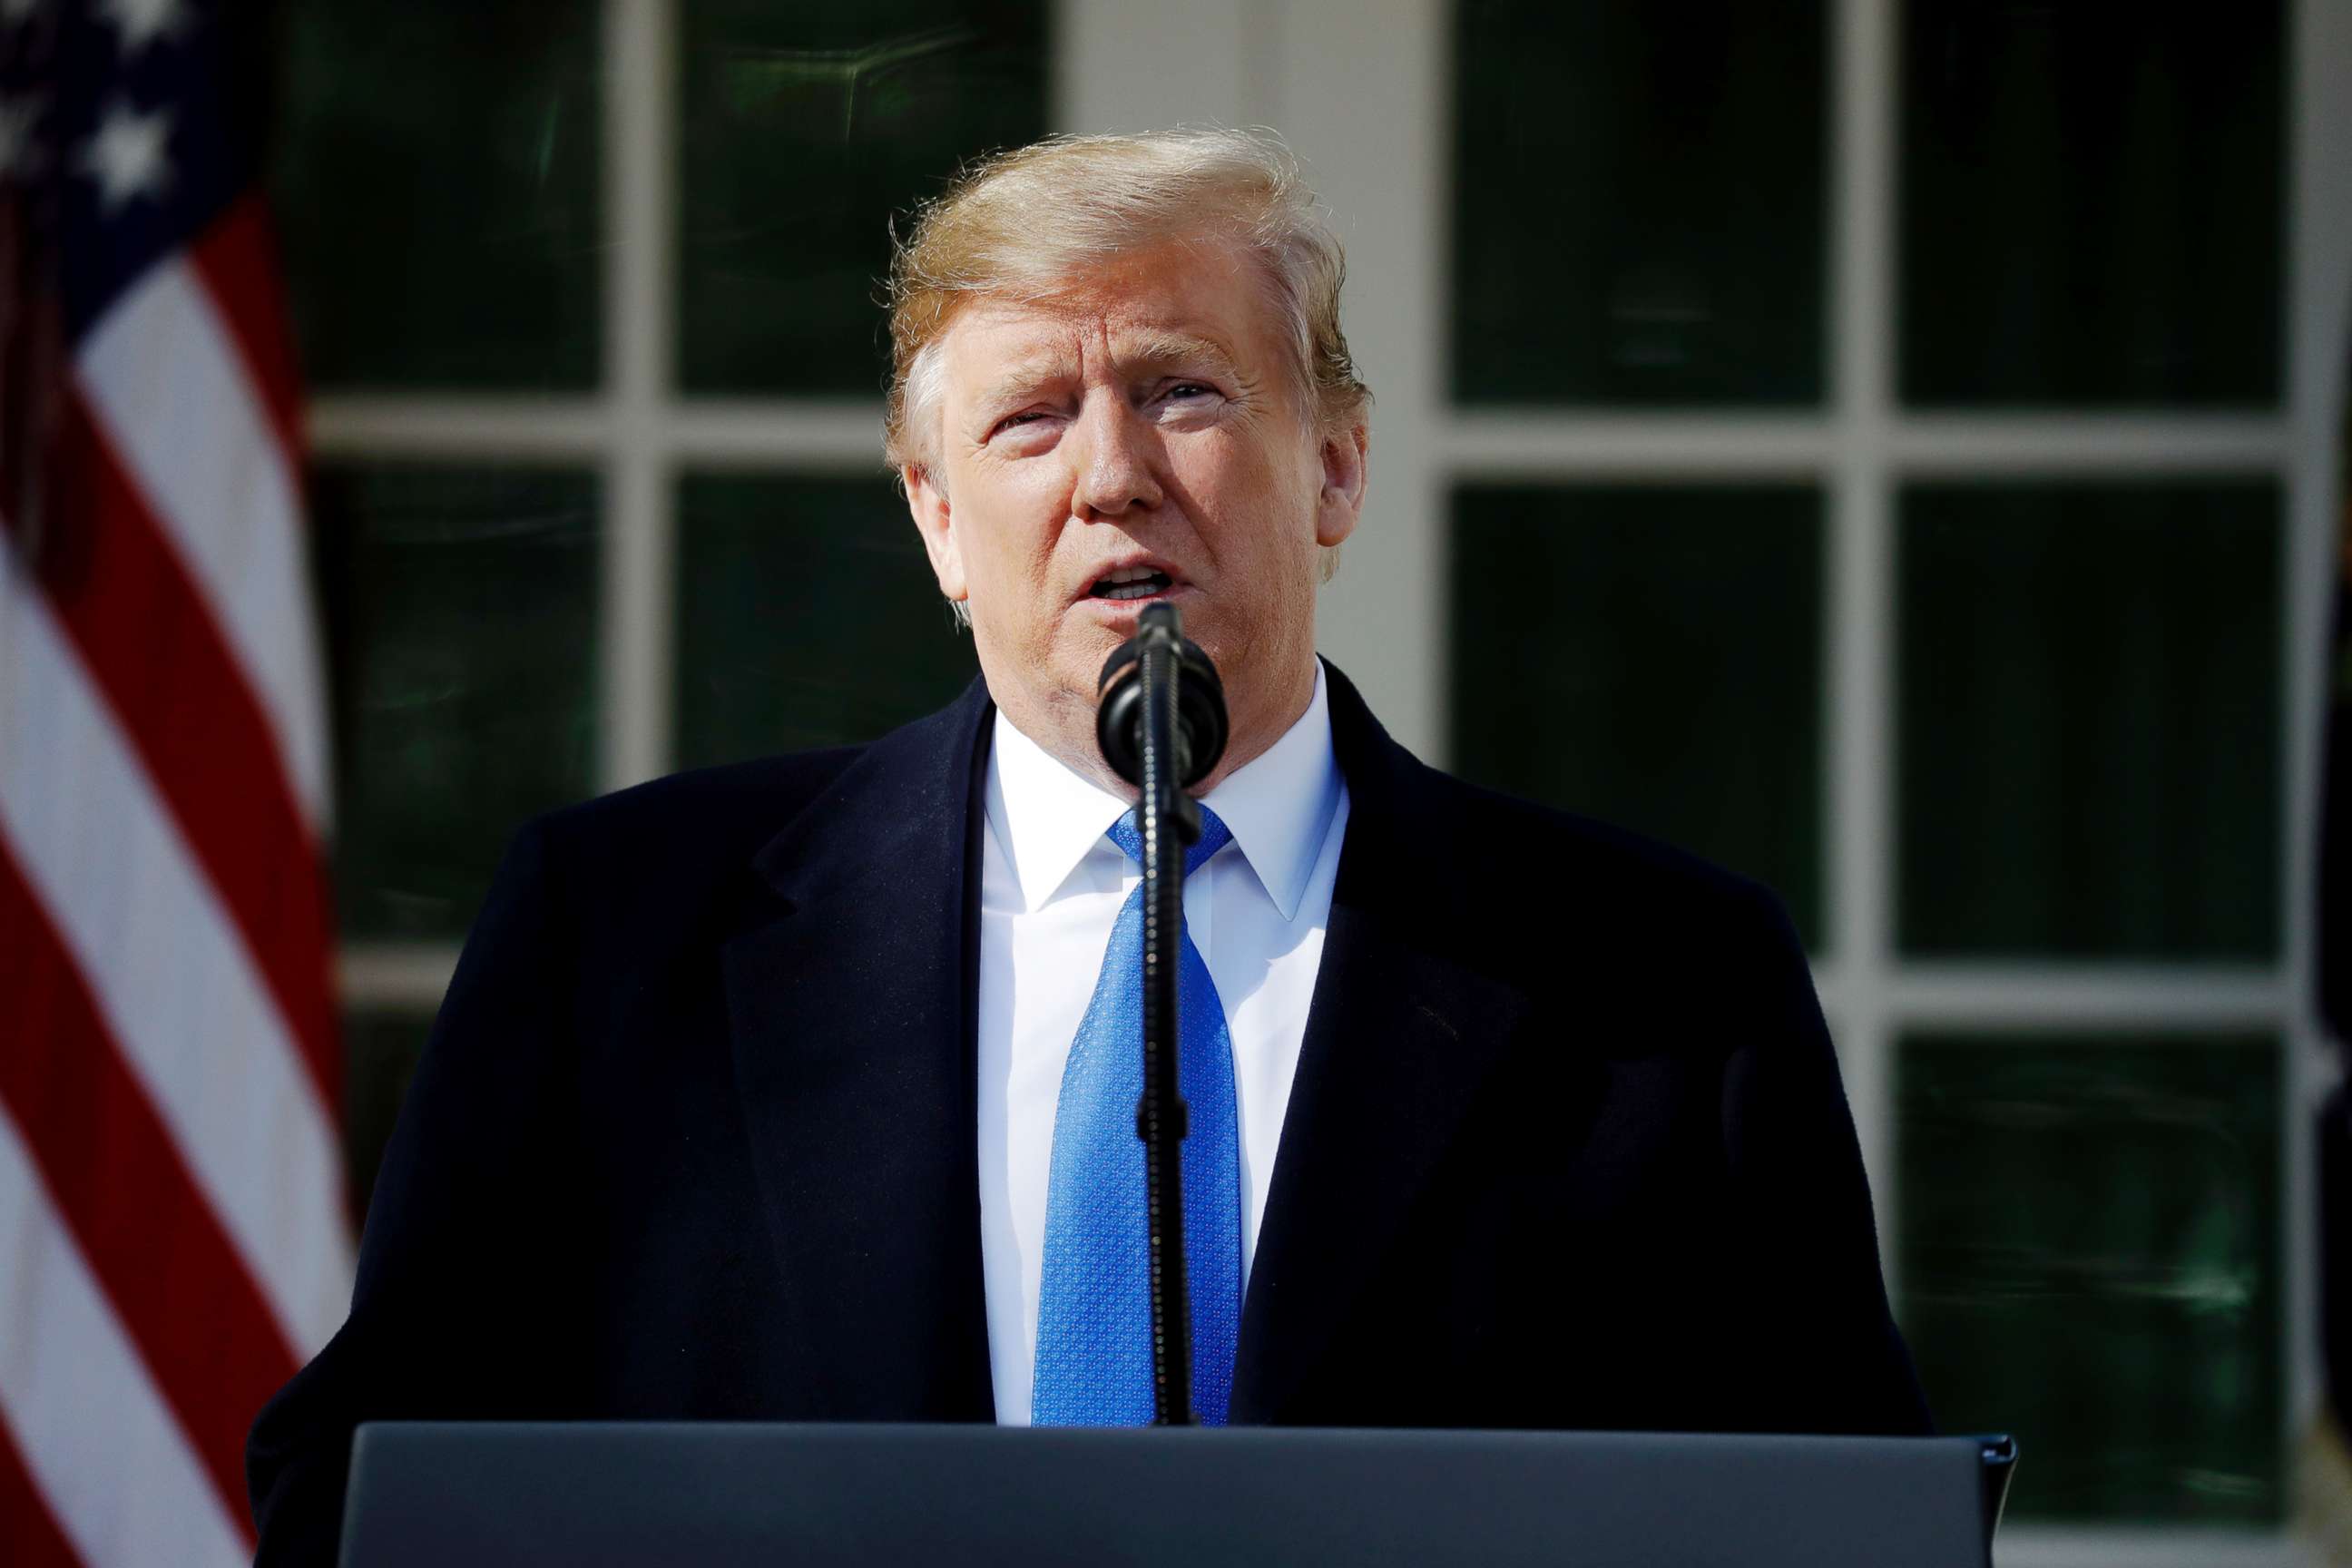 PHOTO: President Donald Trump speaks during an event in the Rose Garden at the White House to declare a national emergency in order to build a wall along the southern border in Washington, D.C., Feb. 15, 2019.